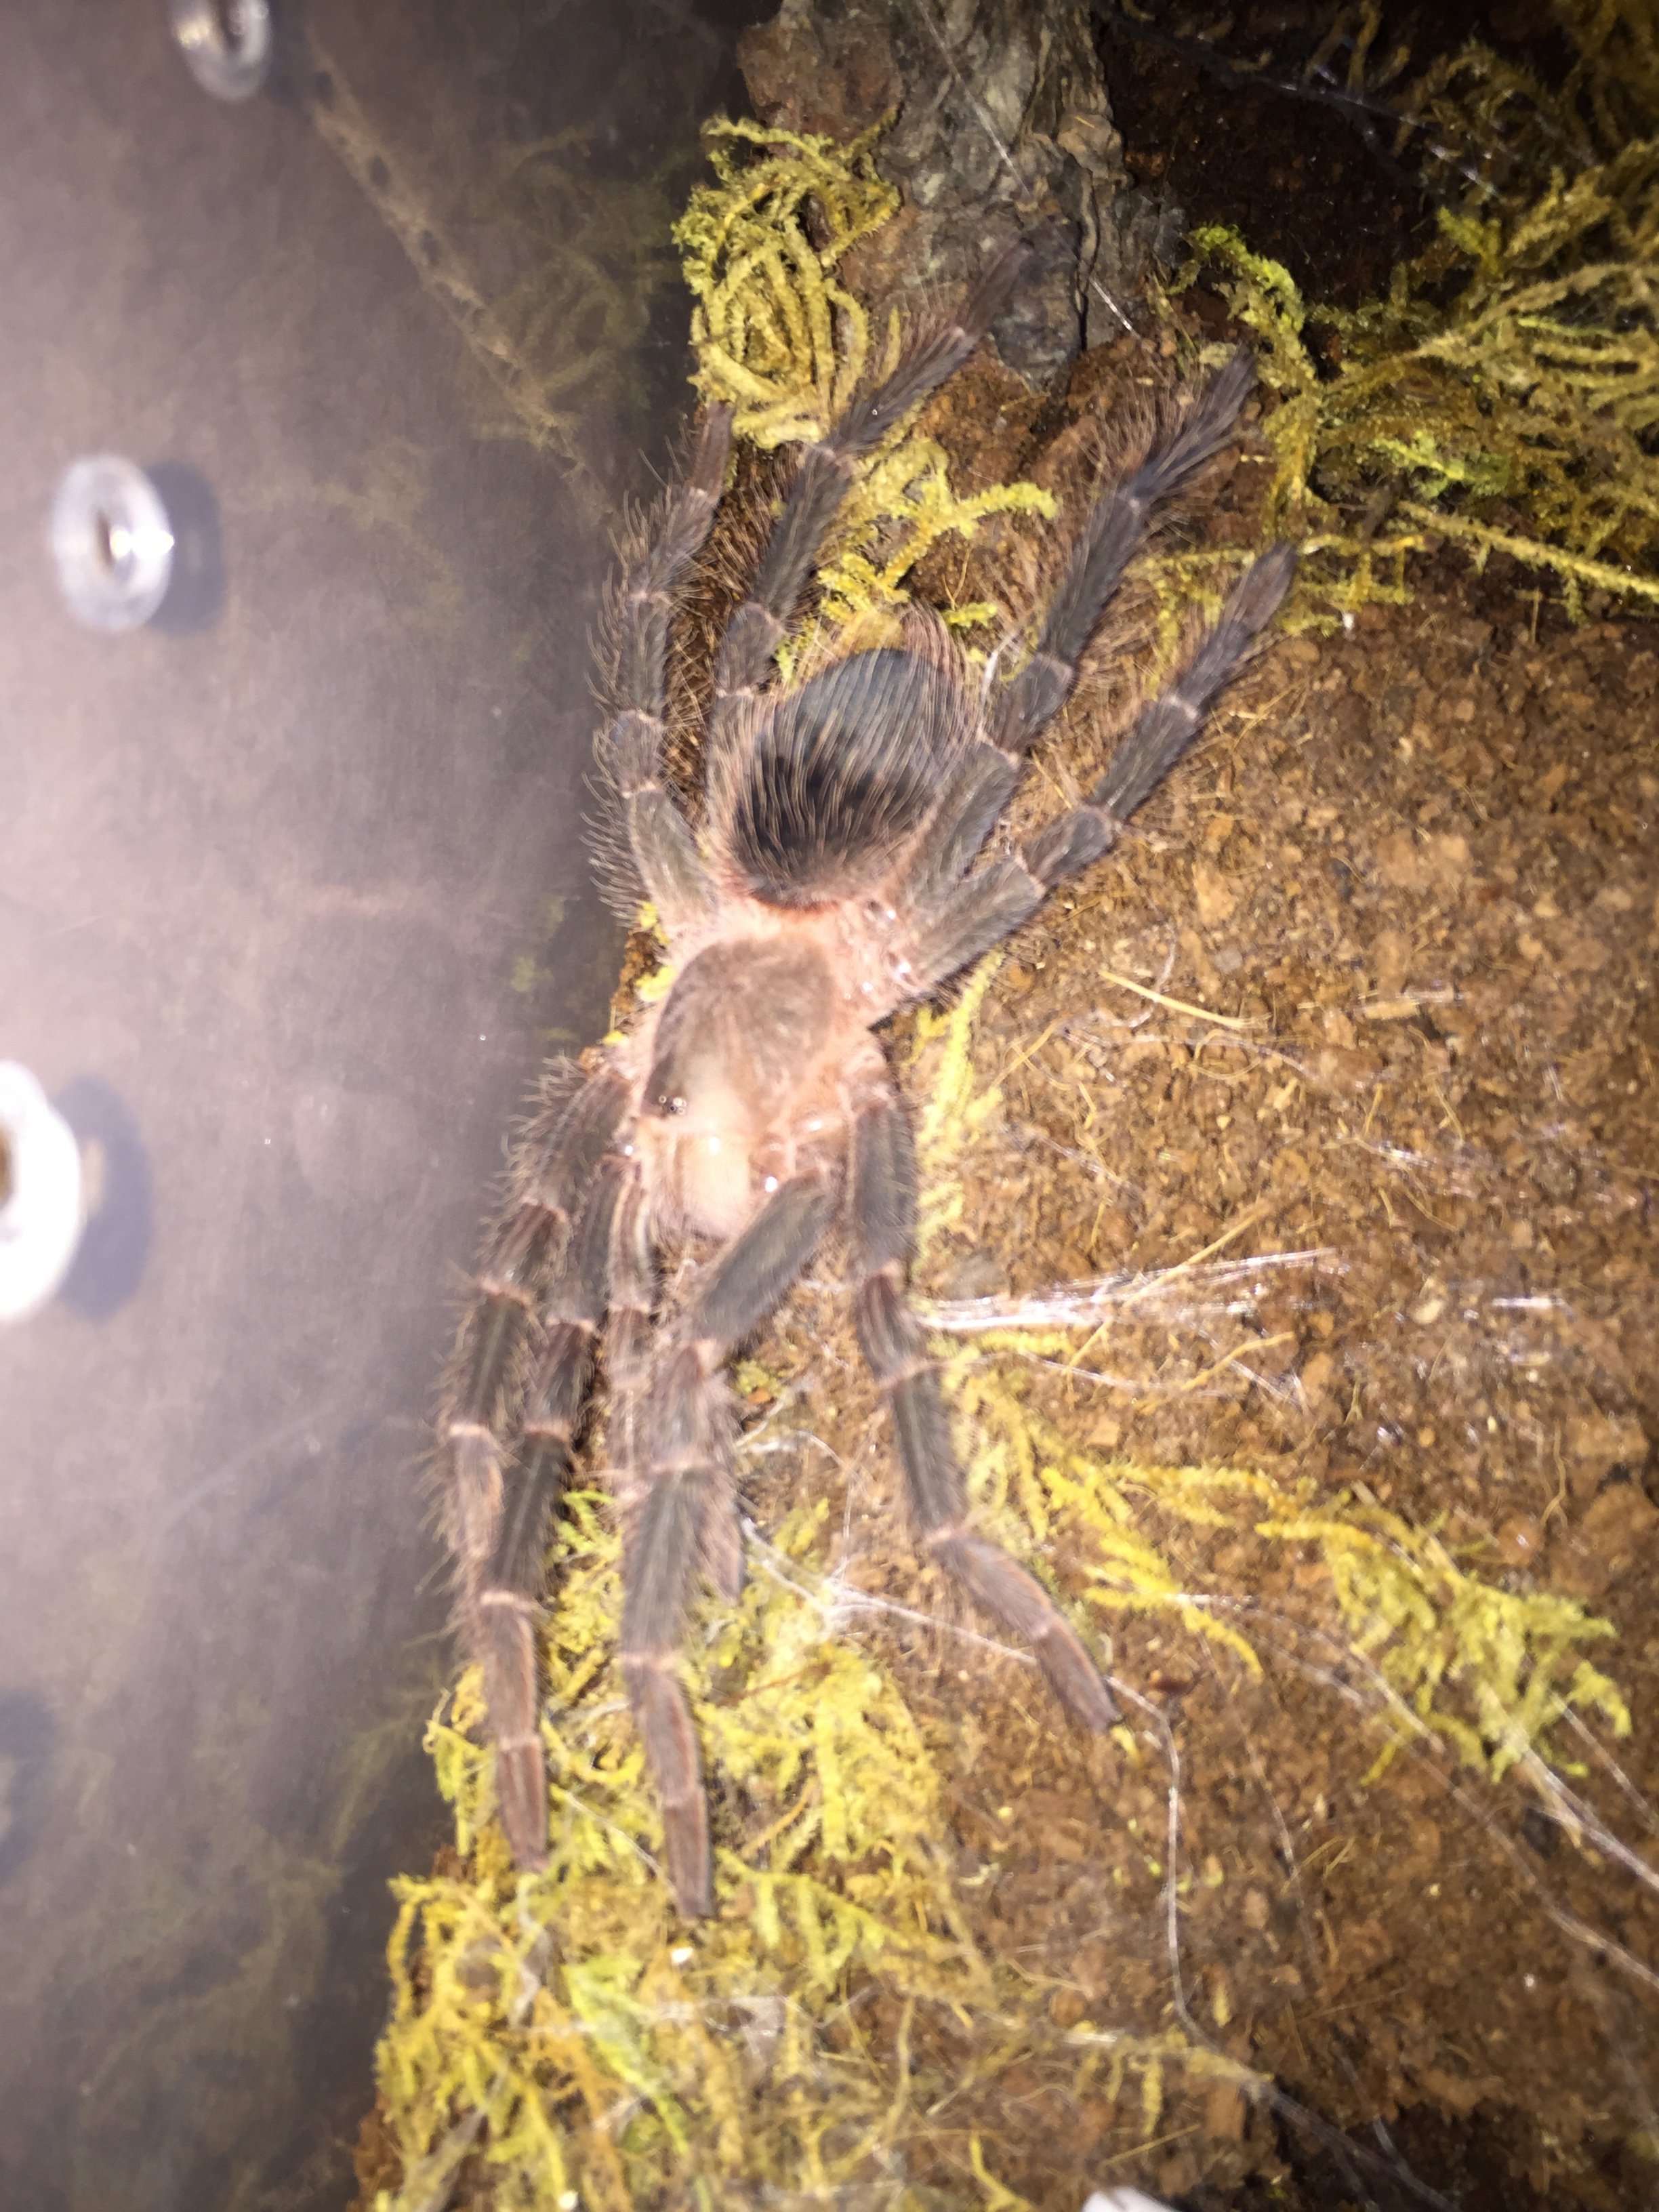 LP stretching it's spaghetti legs after molt.